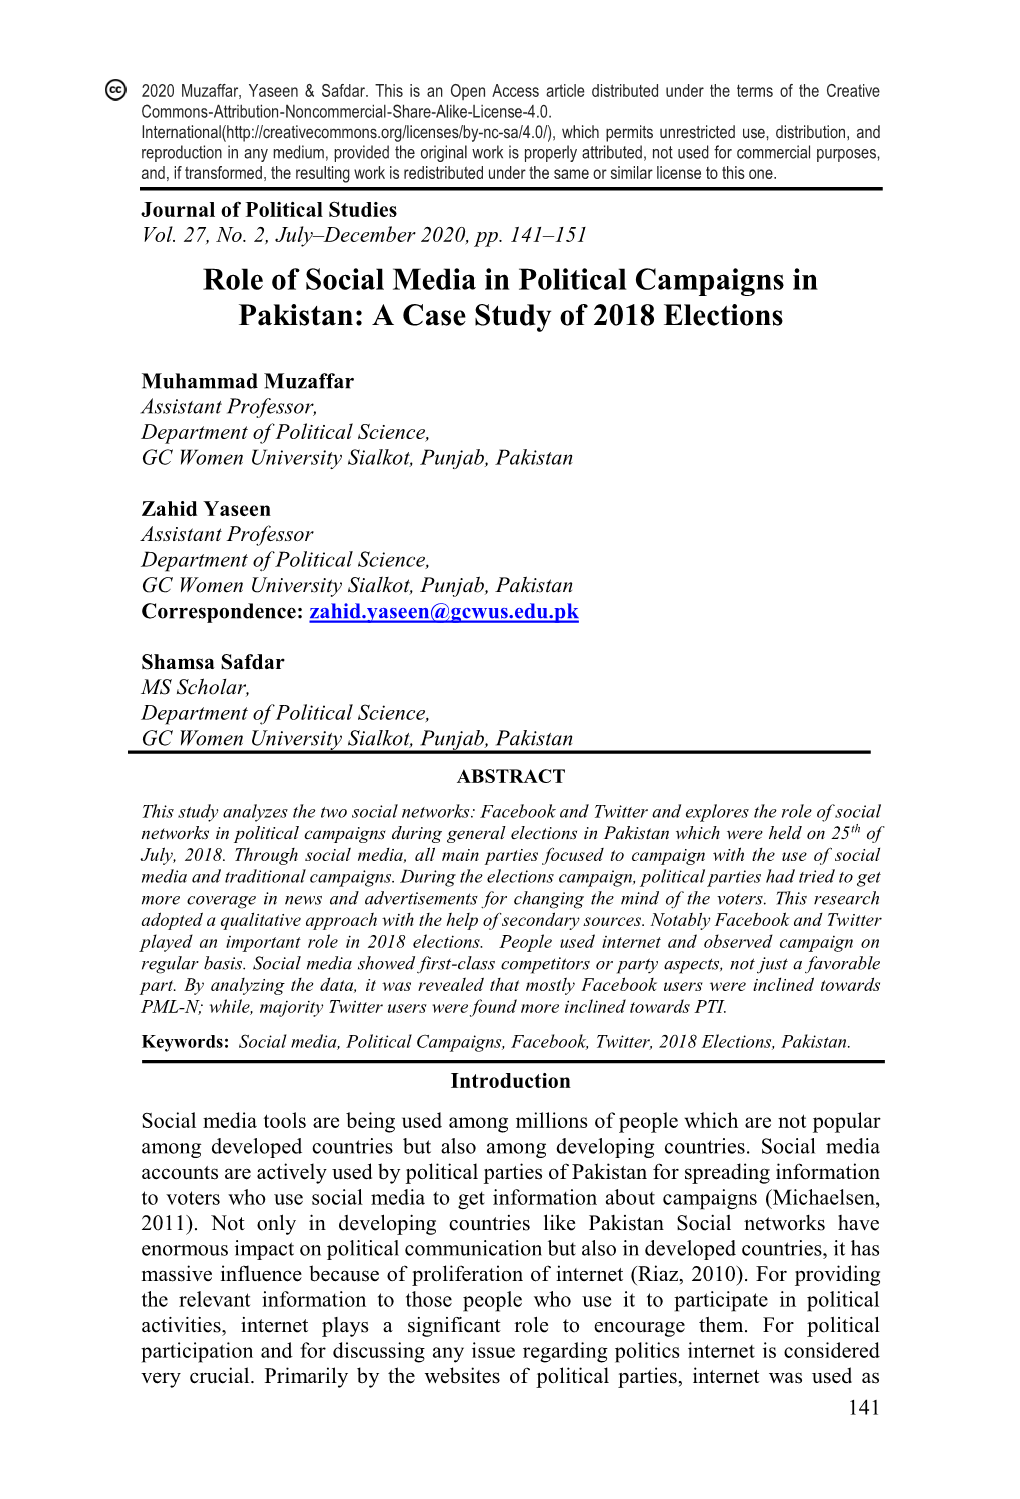 Role of Social Media in Political Campaigns in Pakistan: a Case Study of 2018 Elections